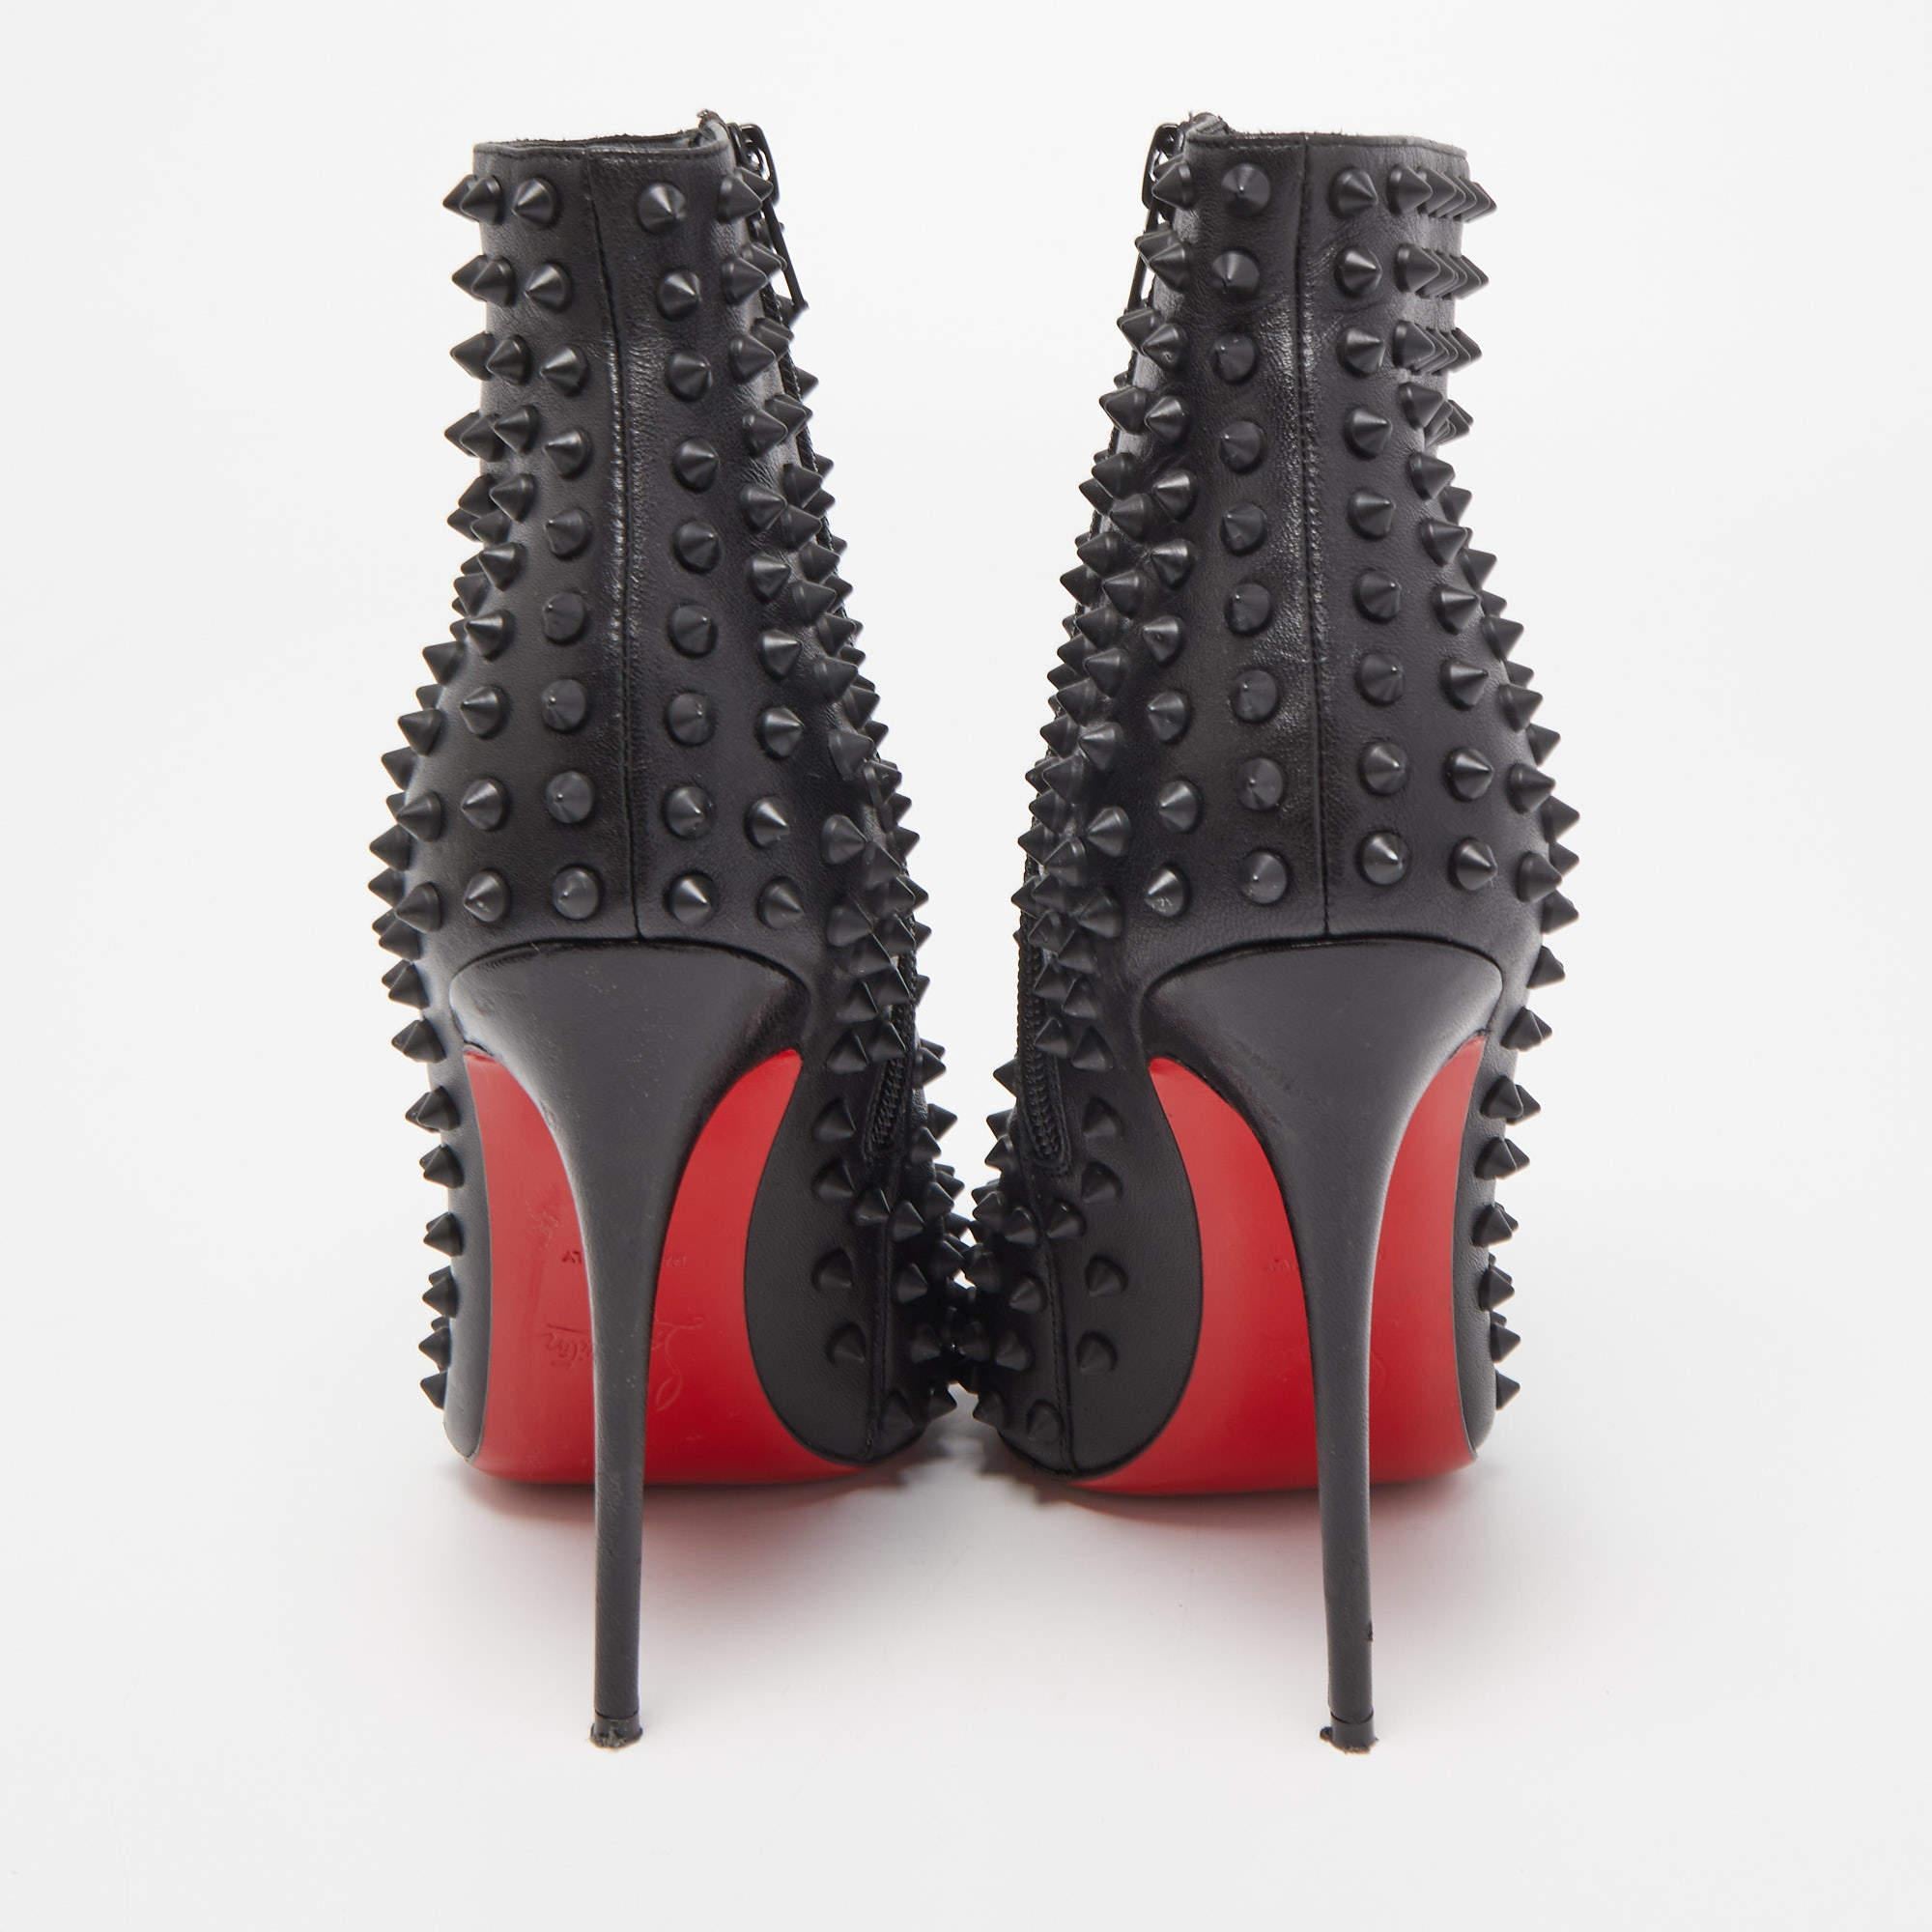 Christian Louboutin Black Leather Snakilta Spike Ankle Booties Size 38 3